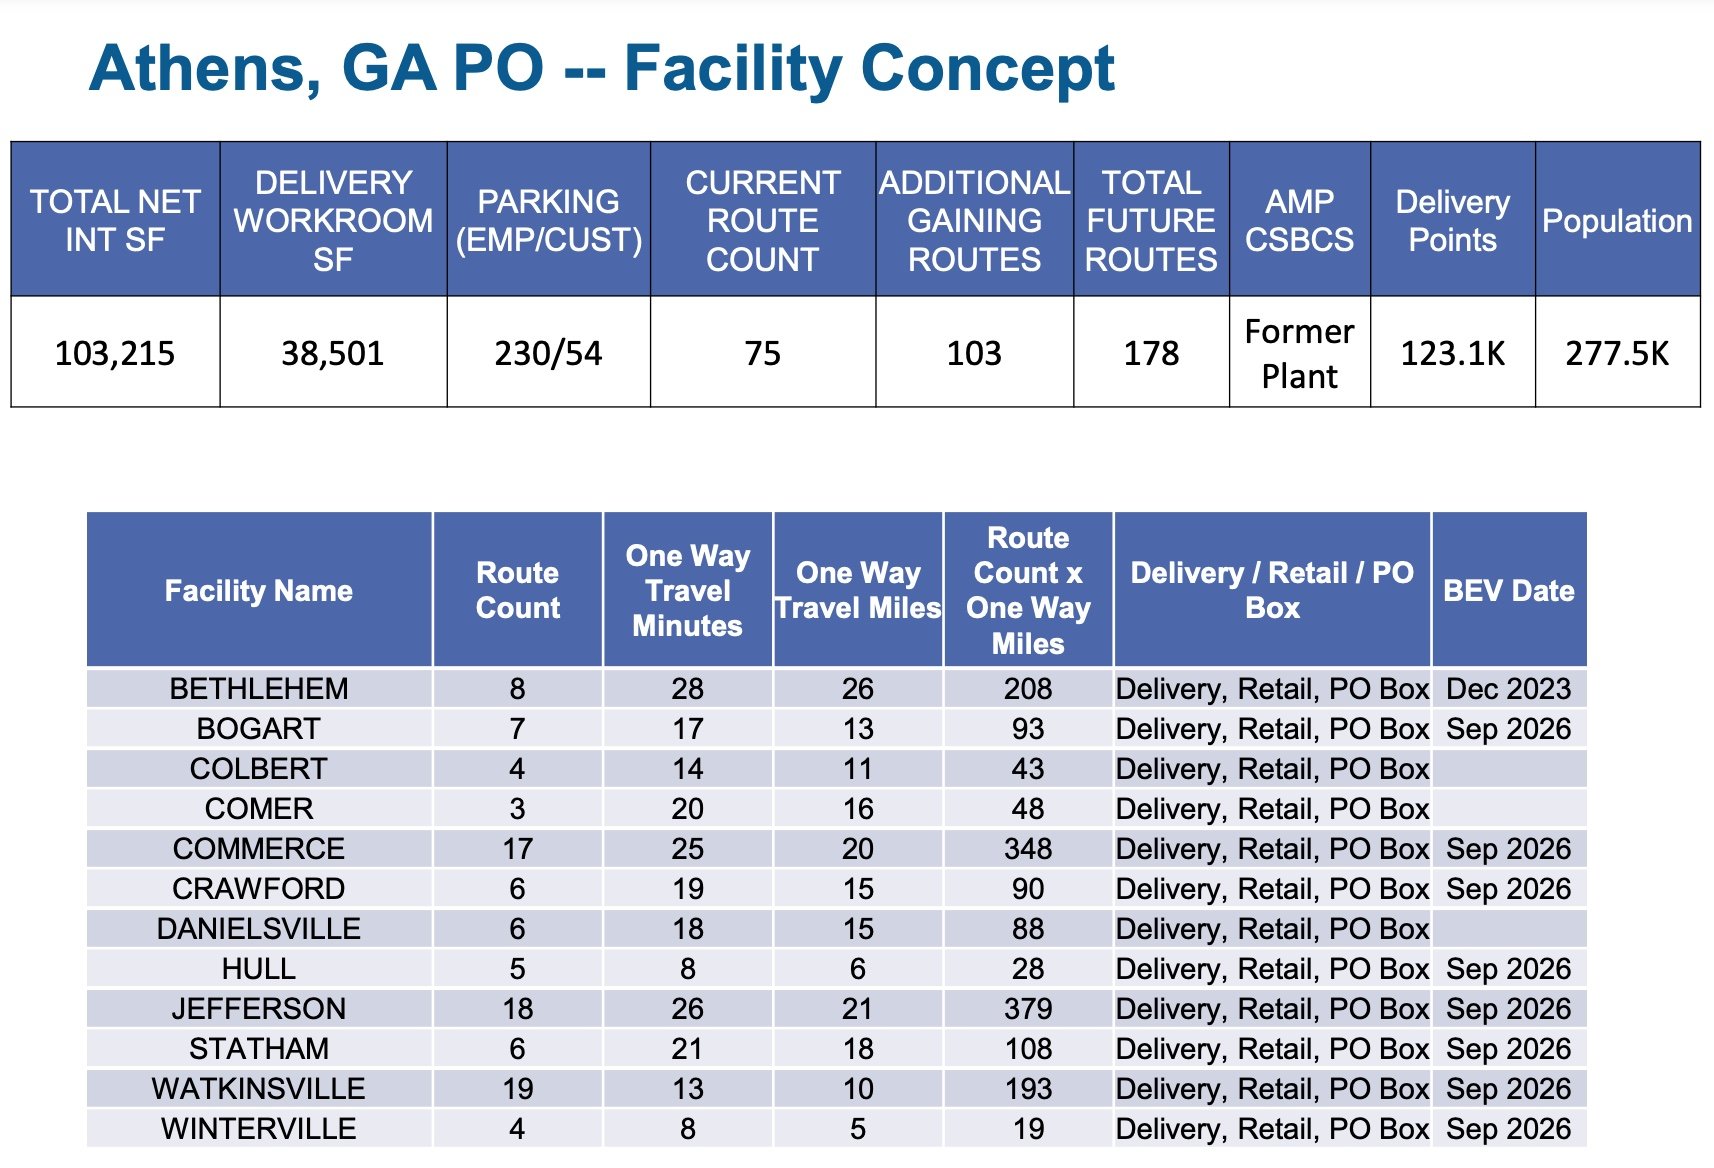 Introducing the New USPS Sorting & Delivery Centers